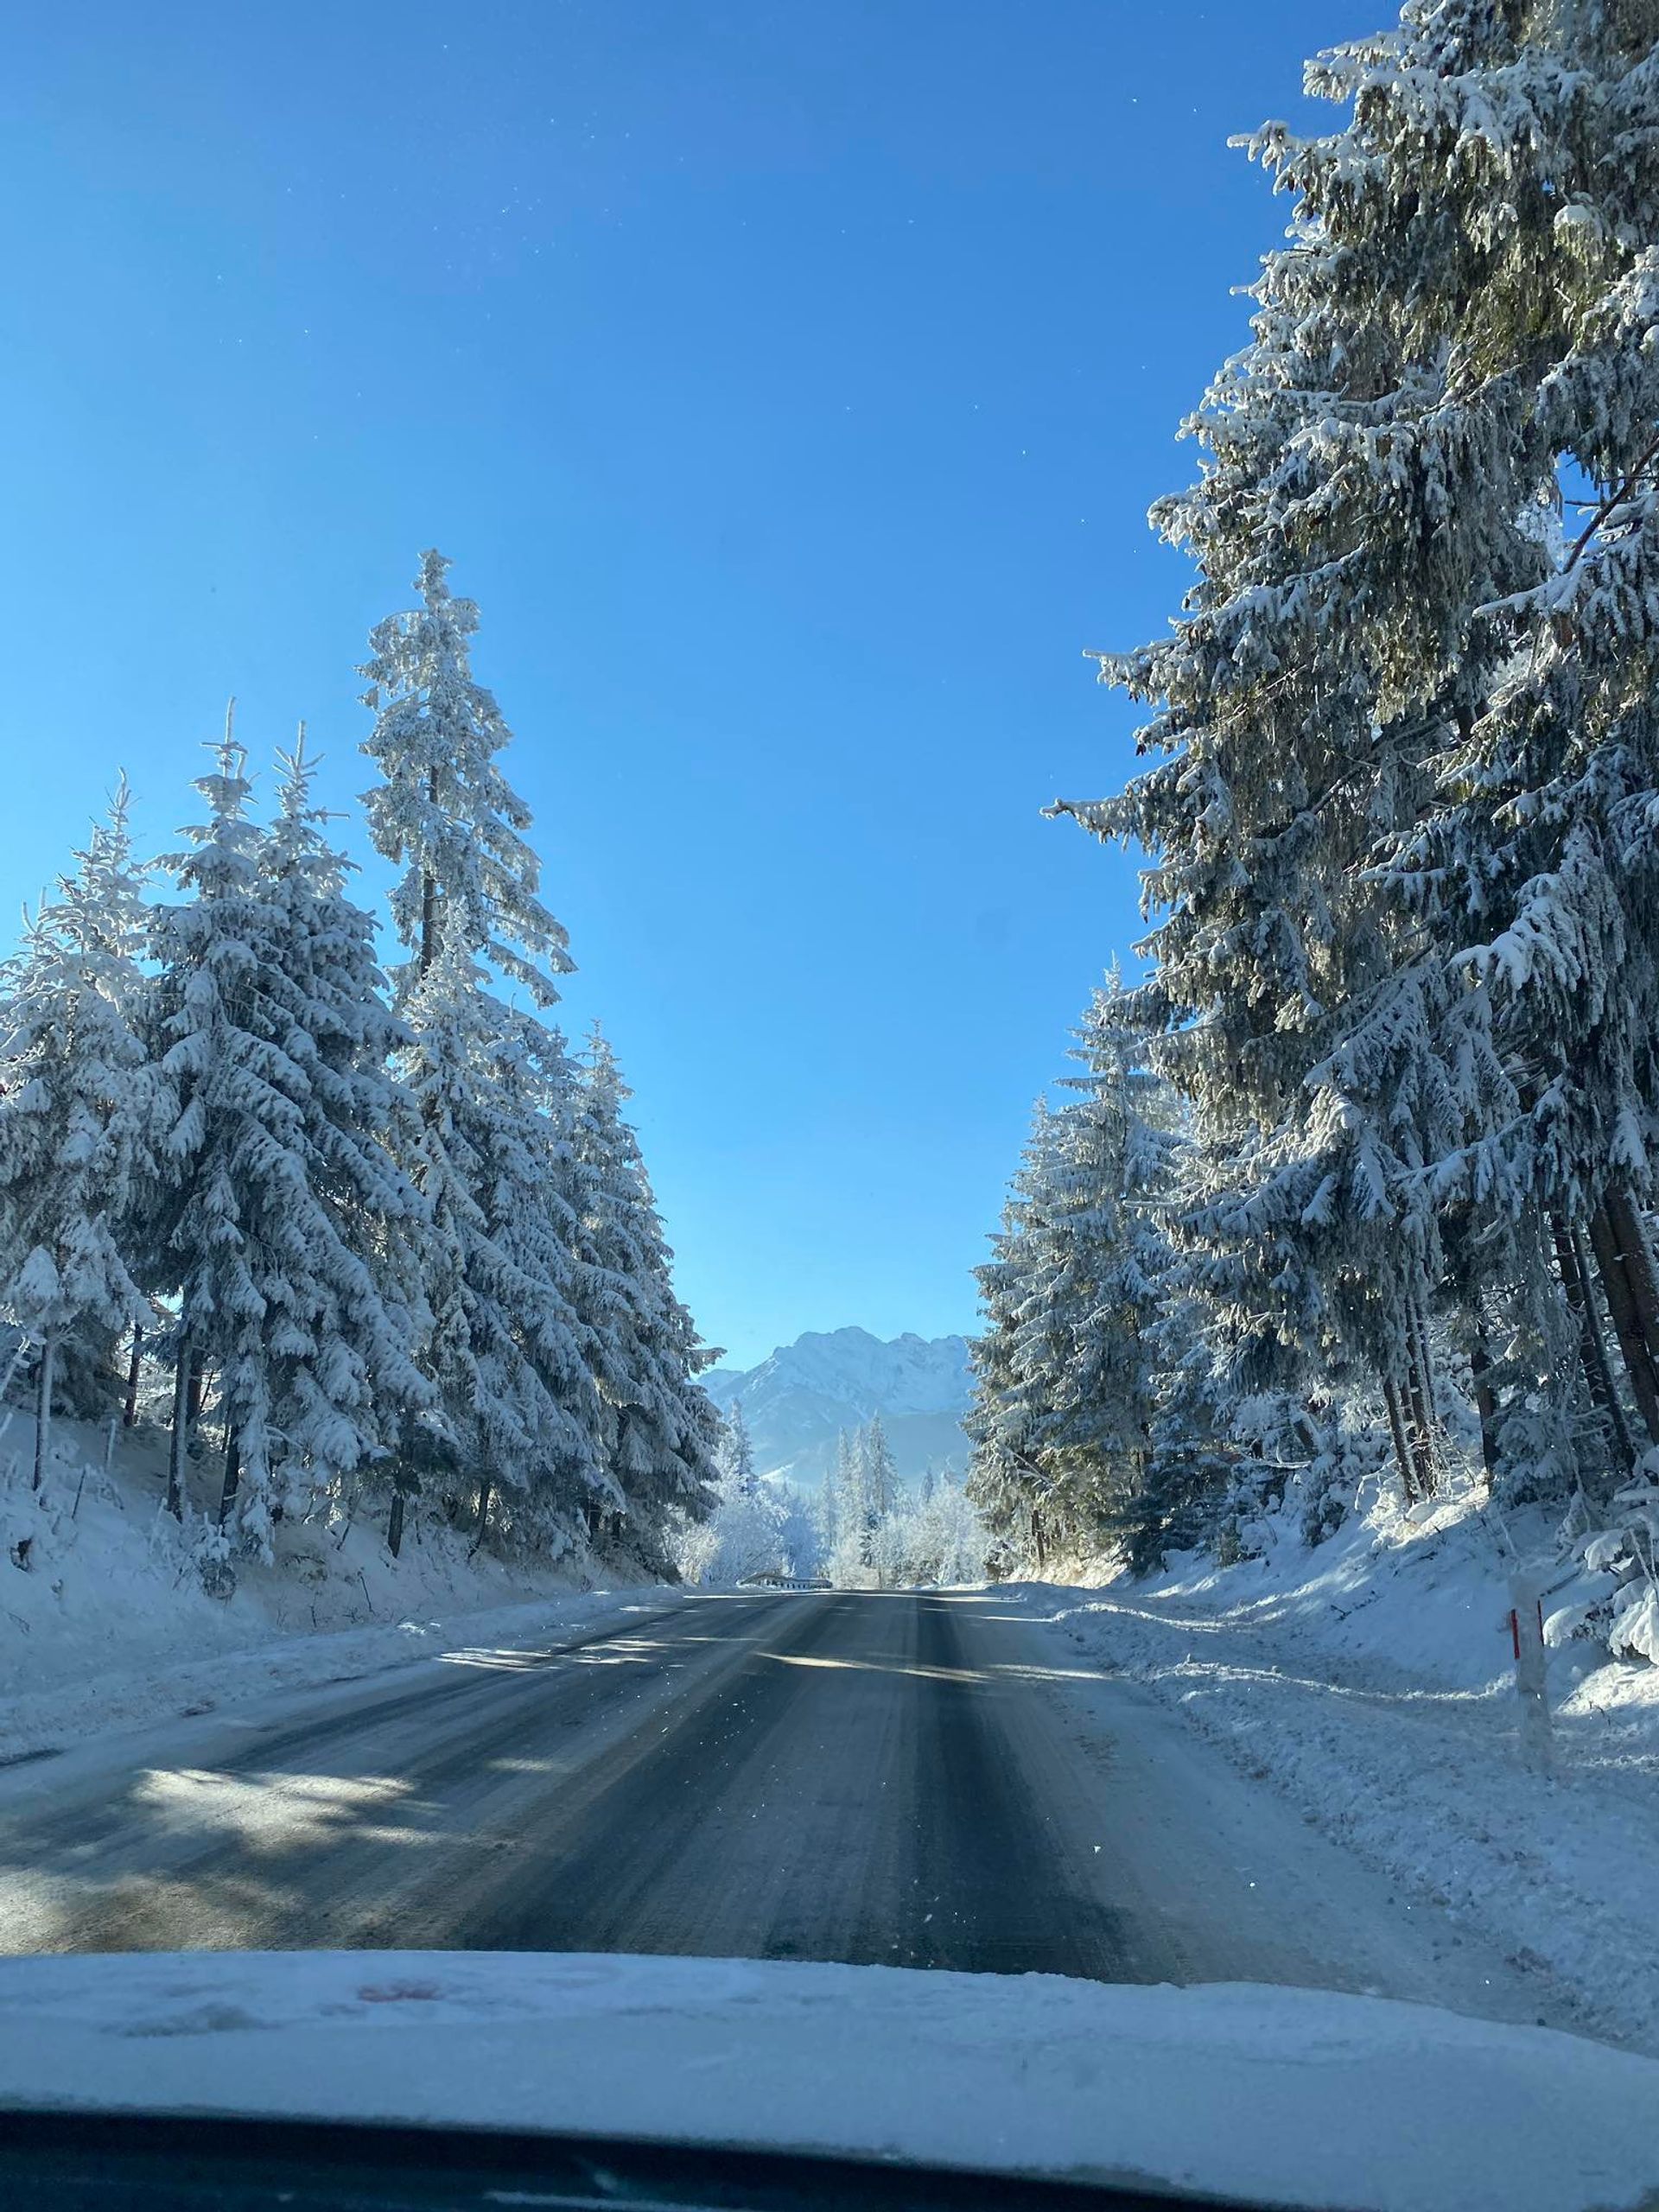 A picture from the car window of a snowy landscape with icy roads and snow-covered trees